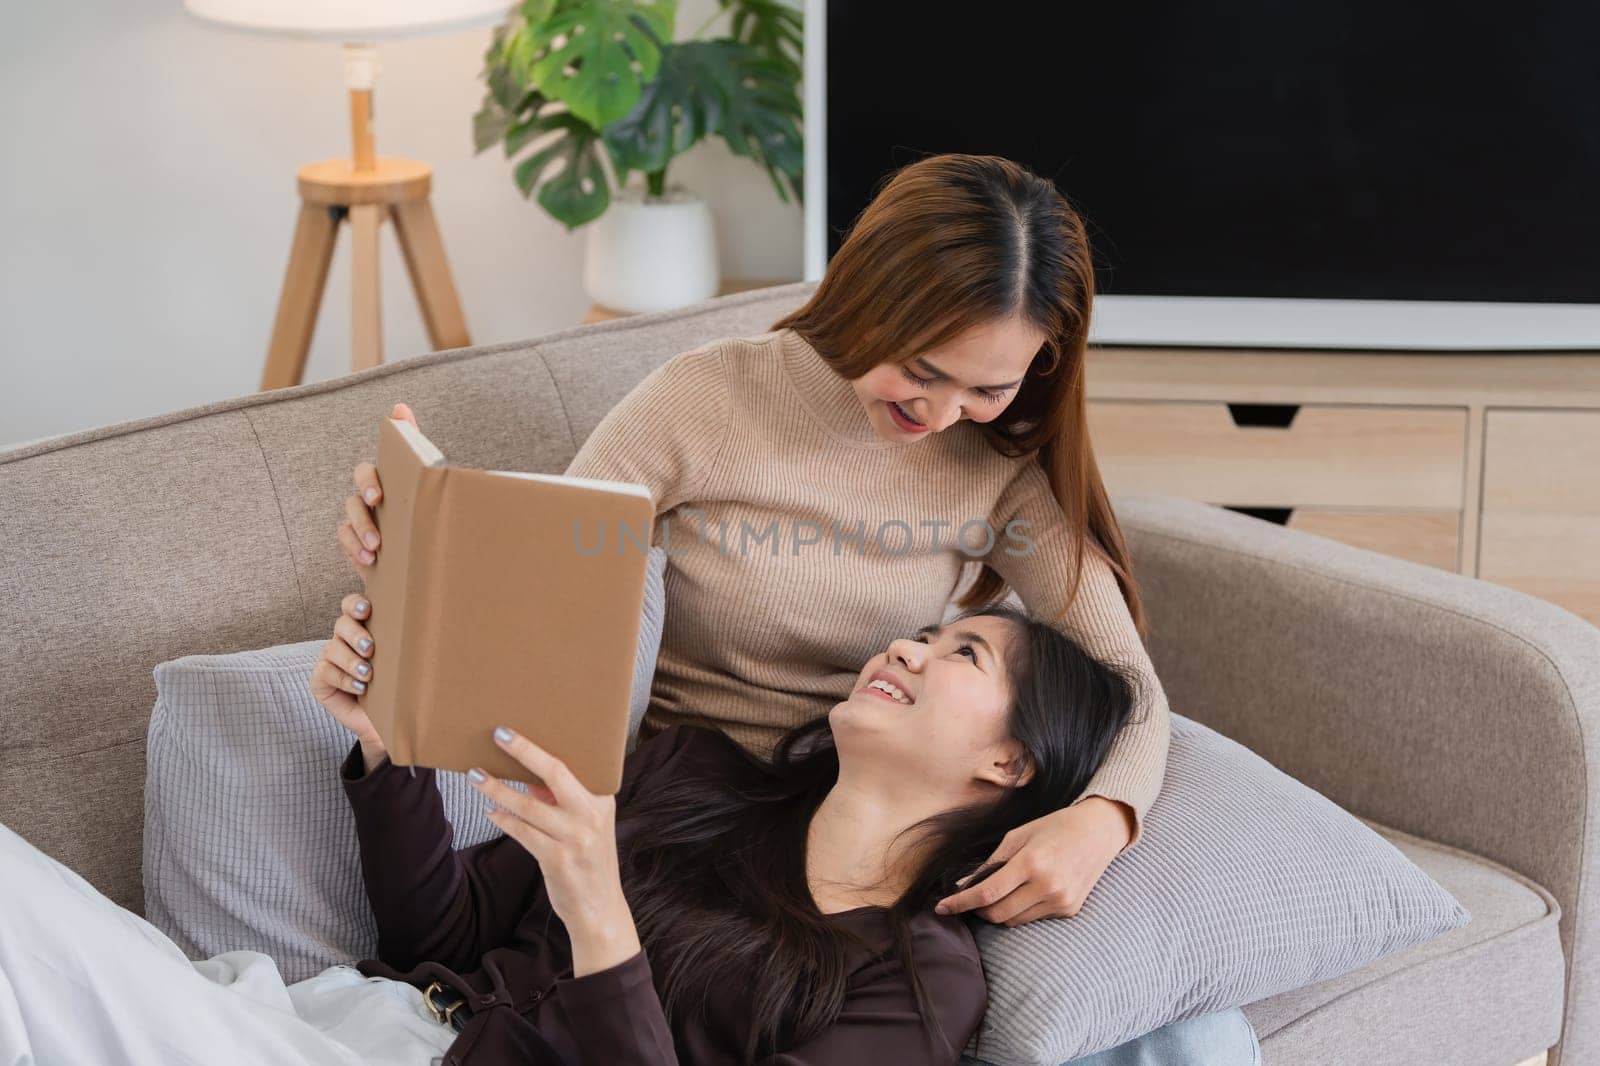 Lesbian Couple Enjoying Quality Time Reading Books Together at Home - LGBT Love and Relaxation by wichayada